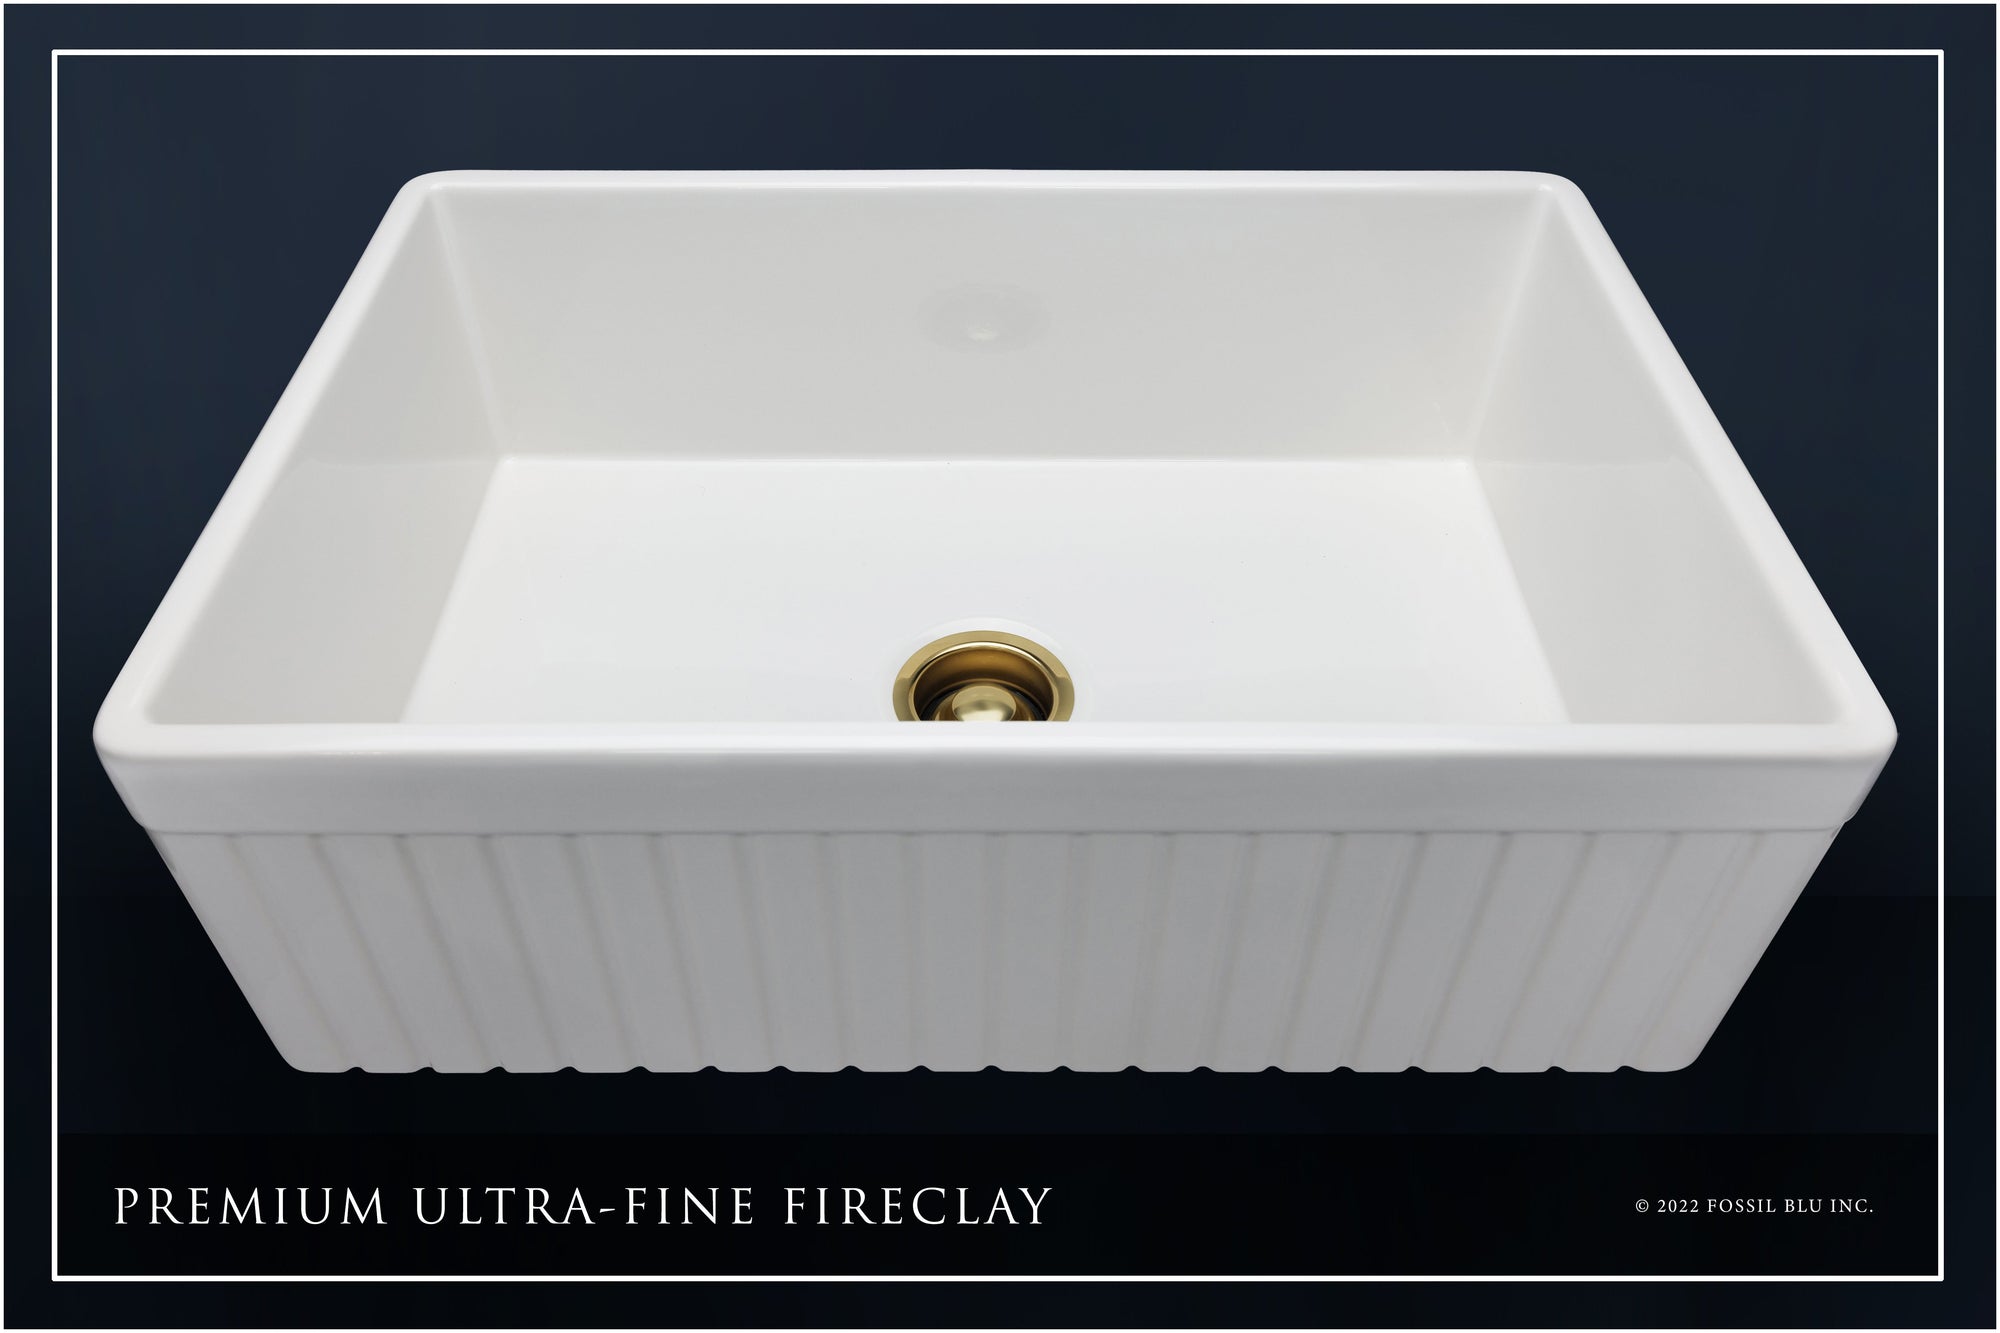 FSW1007BB LUXURY 33-INCH SOLID FIRECLAY FARMHOUSE SINK IN WHITE, MATTE GOLD ACCS, FLUTED FRONT